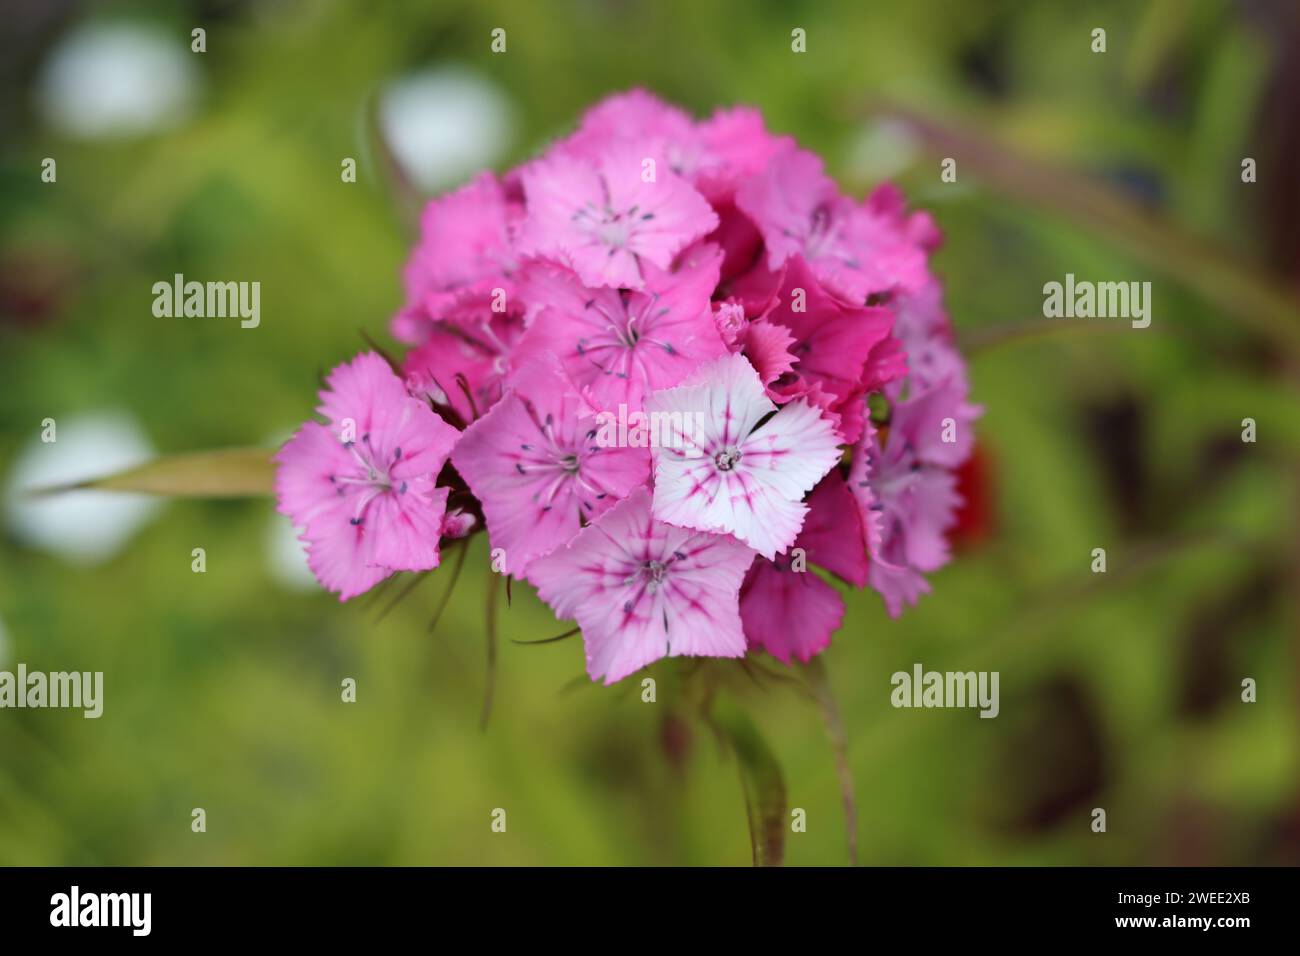 Single pink and white dianthus or sweet william flower Stock Photo